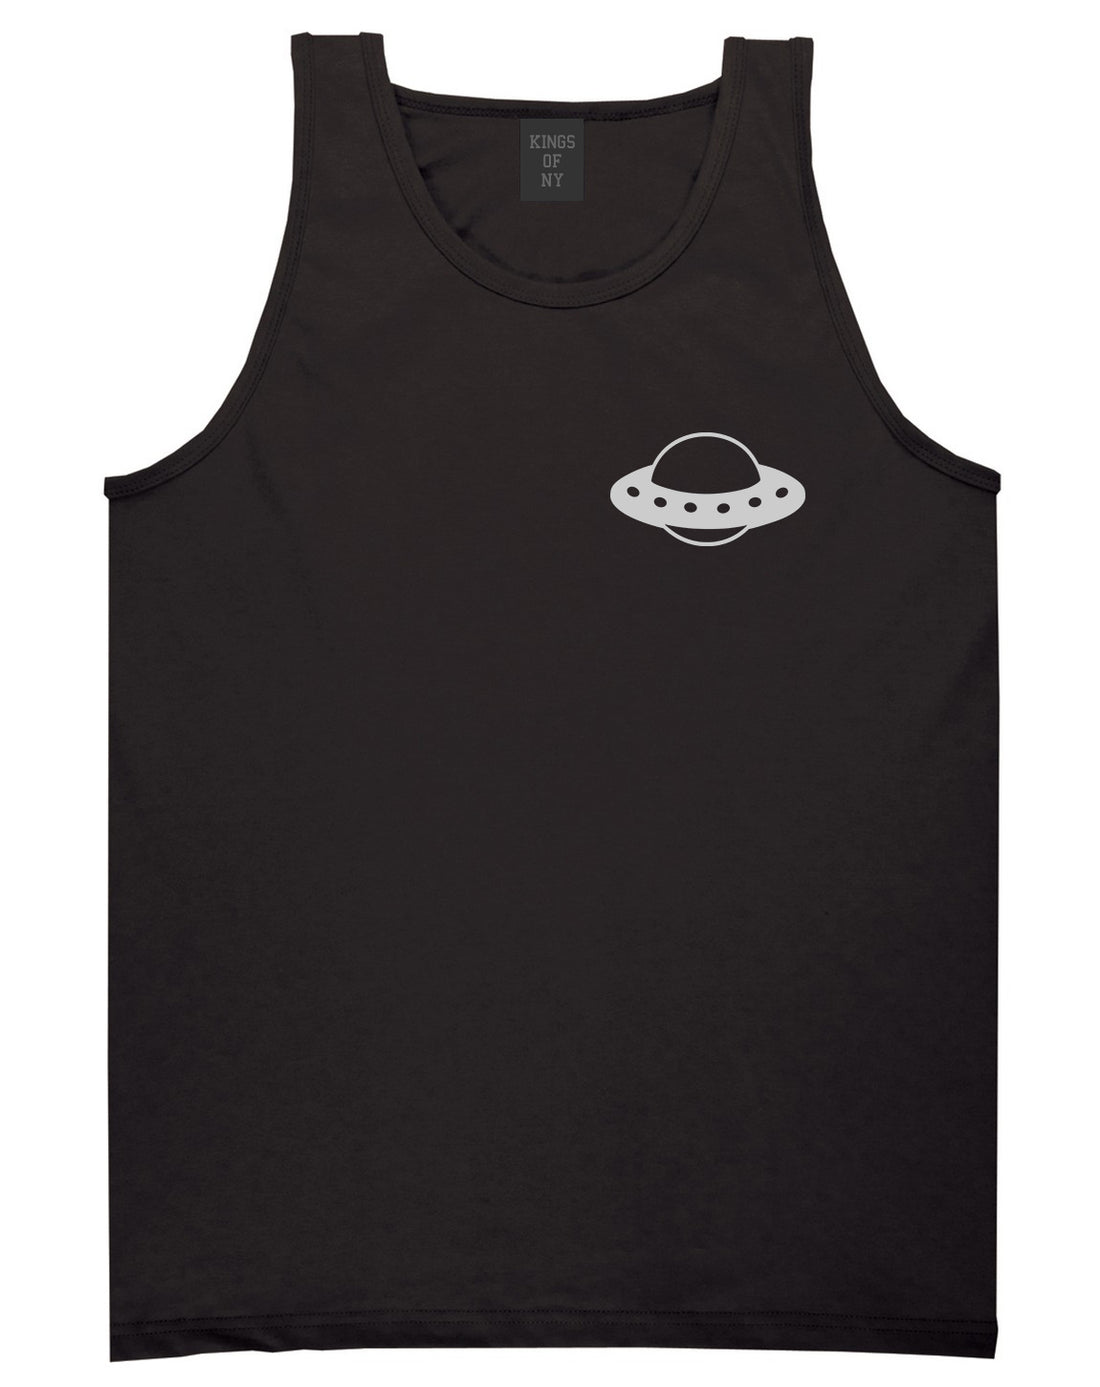 Spaceship_Chest Mens Black Tank Top Shirt by Kings Of NY